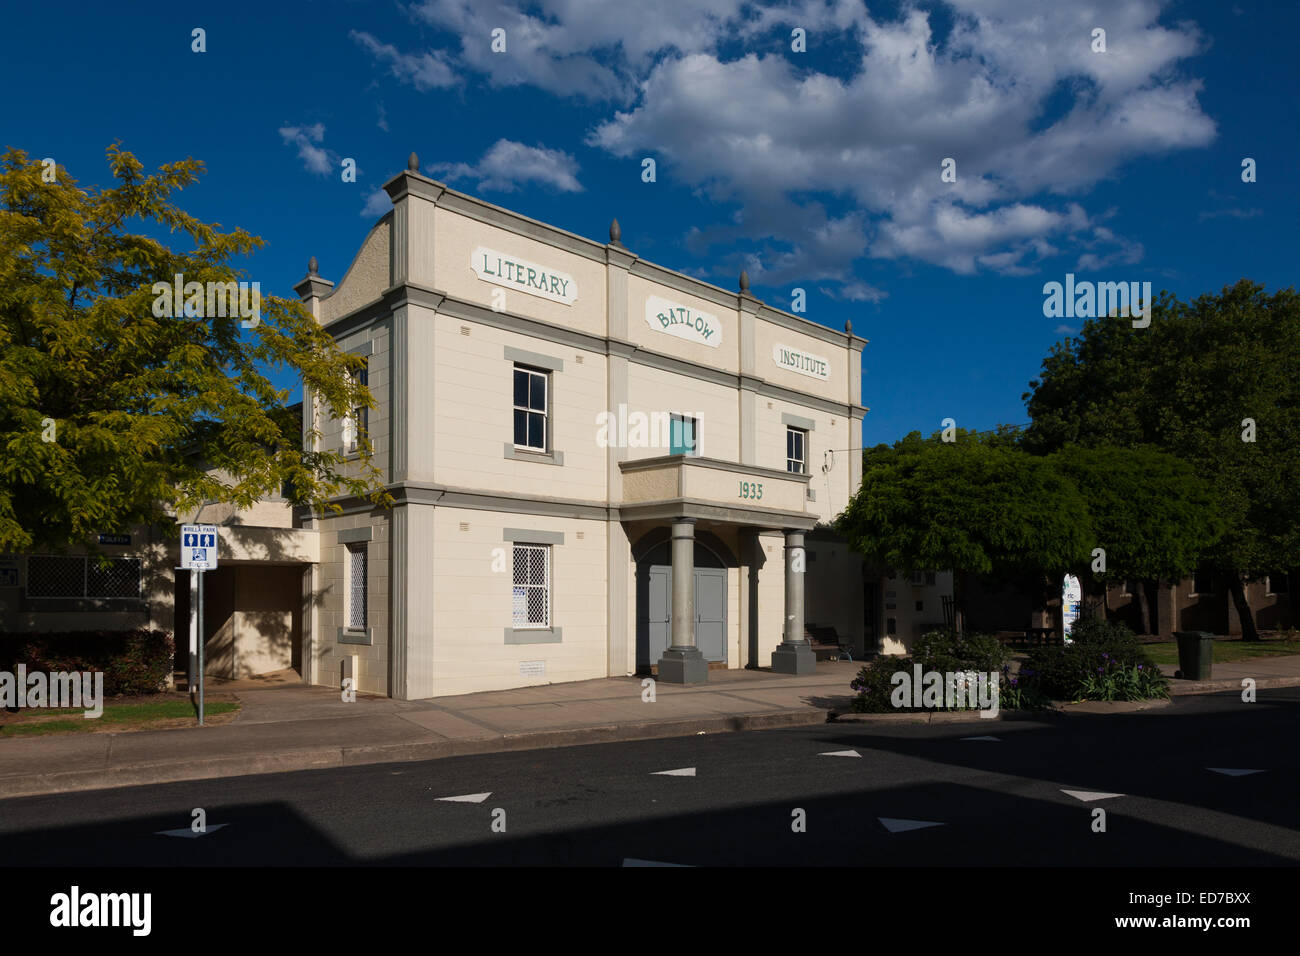 The historic building Batlow Literary Institute (1935) Batlow New South Wales Australia Stock Photo